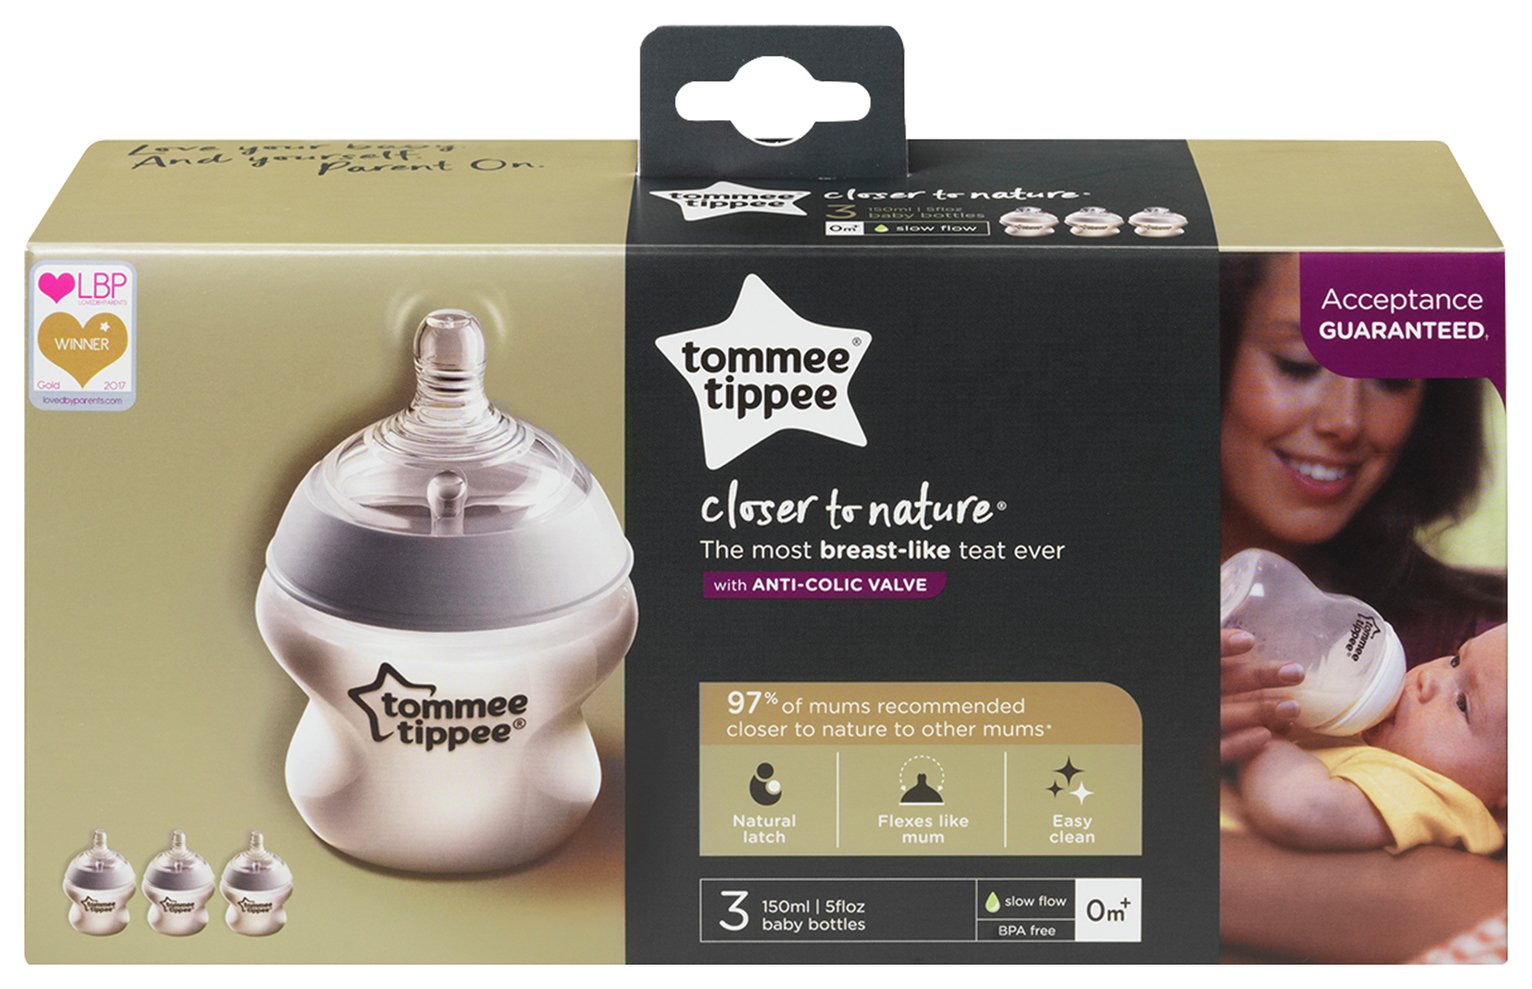 Tommee Tippee Closer to Nature Bottles 150ml x 3. Review